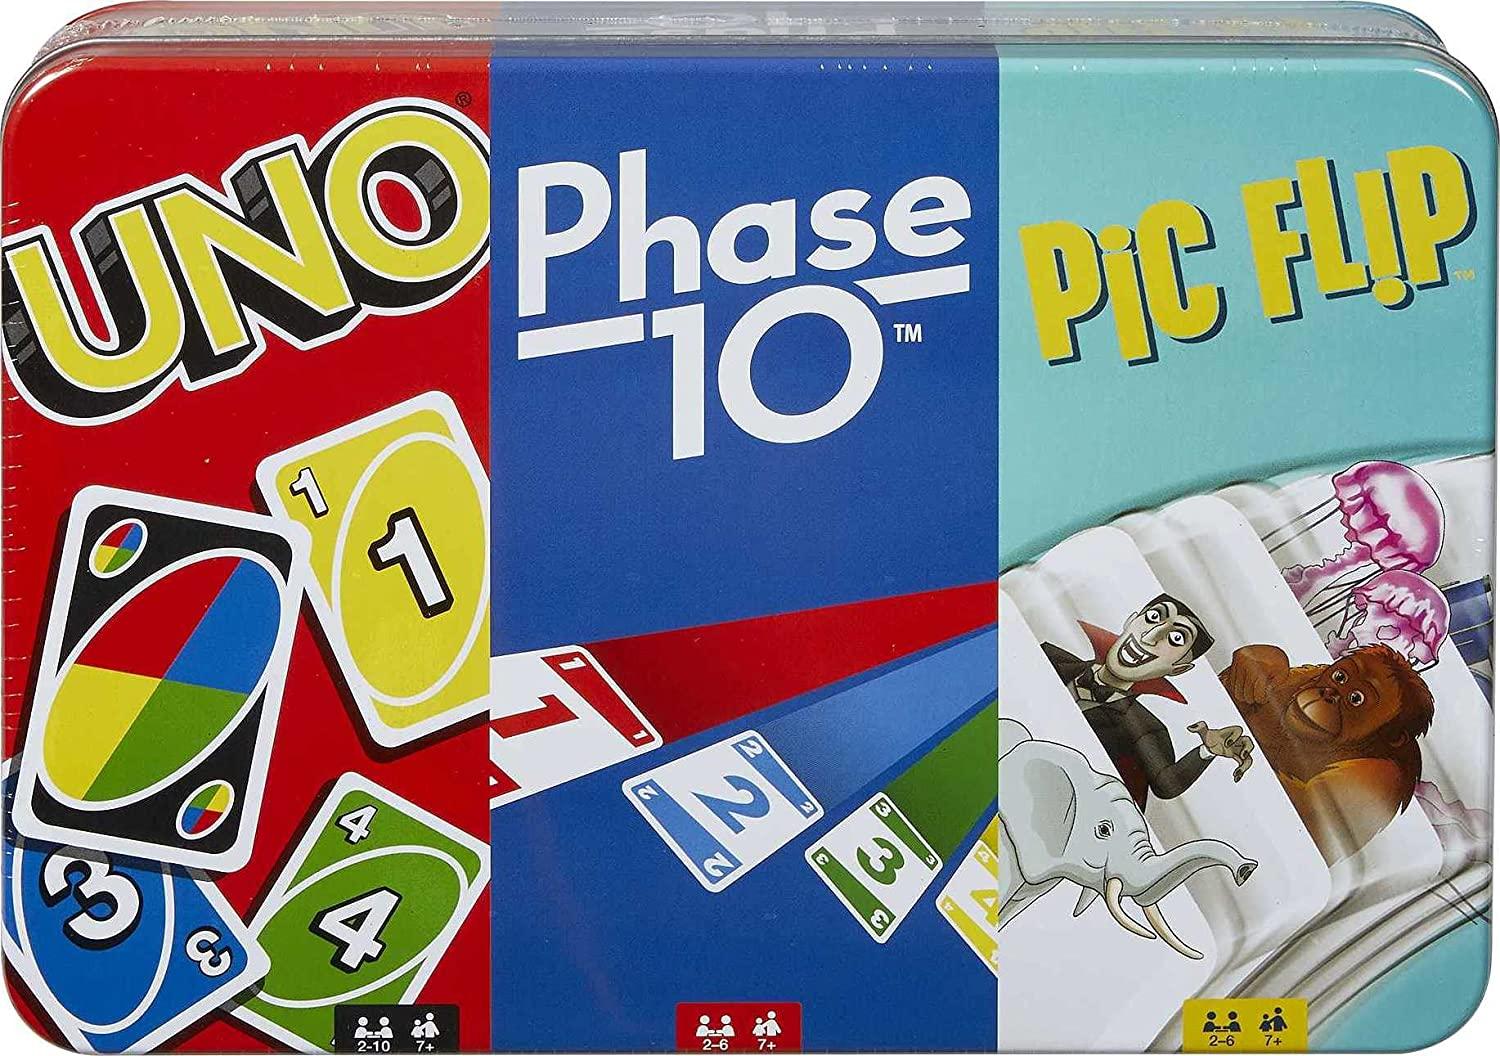 UNO Phase 10 Pic Flip for $10.49